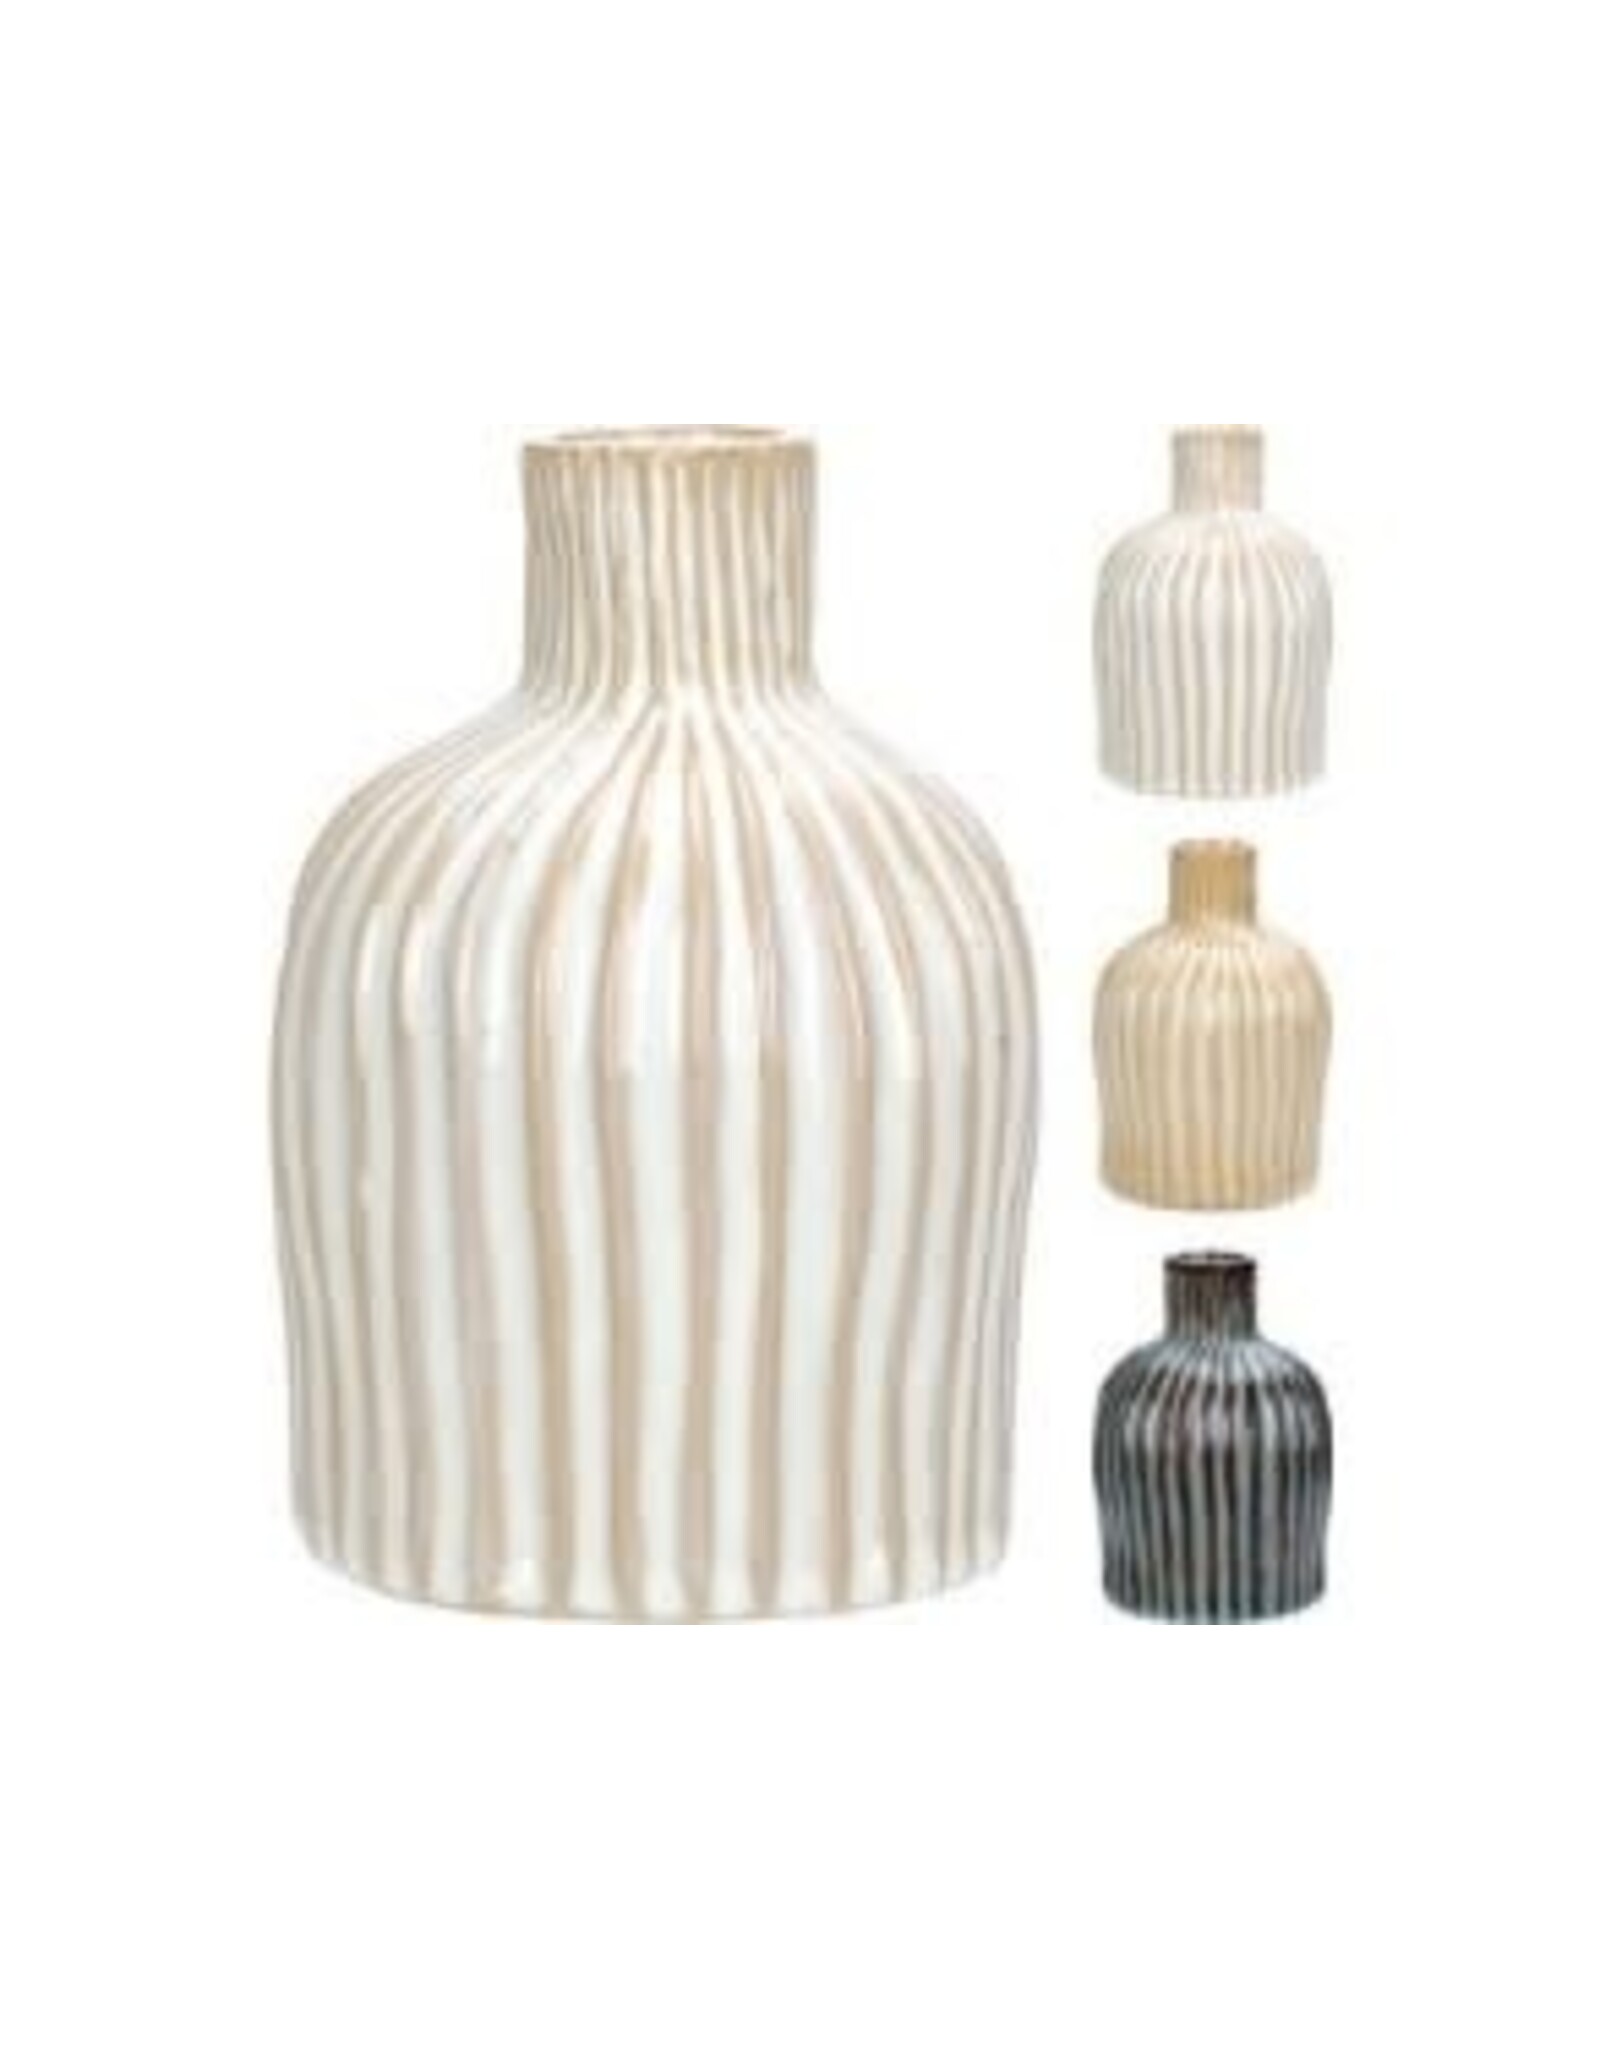 APF646680 VASE WITH STRIPES 3.94"X5.91" 3ASS